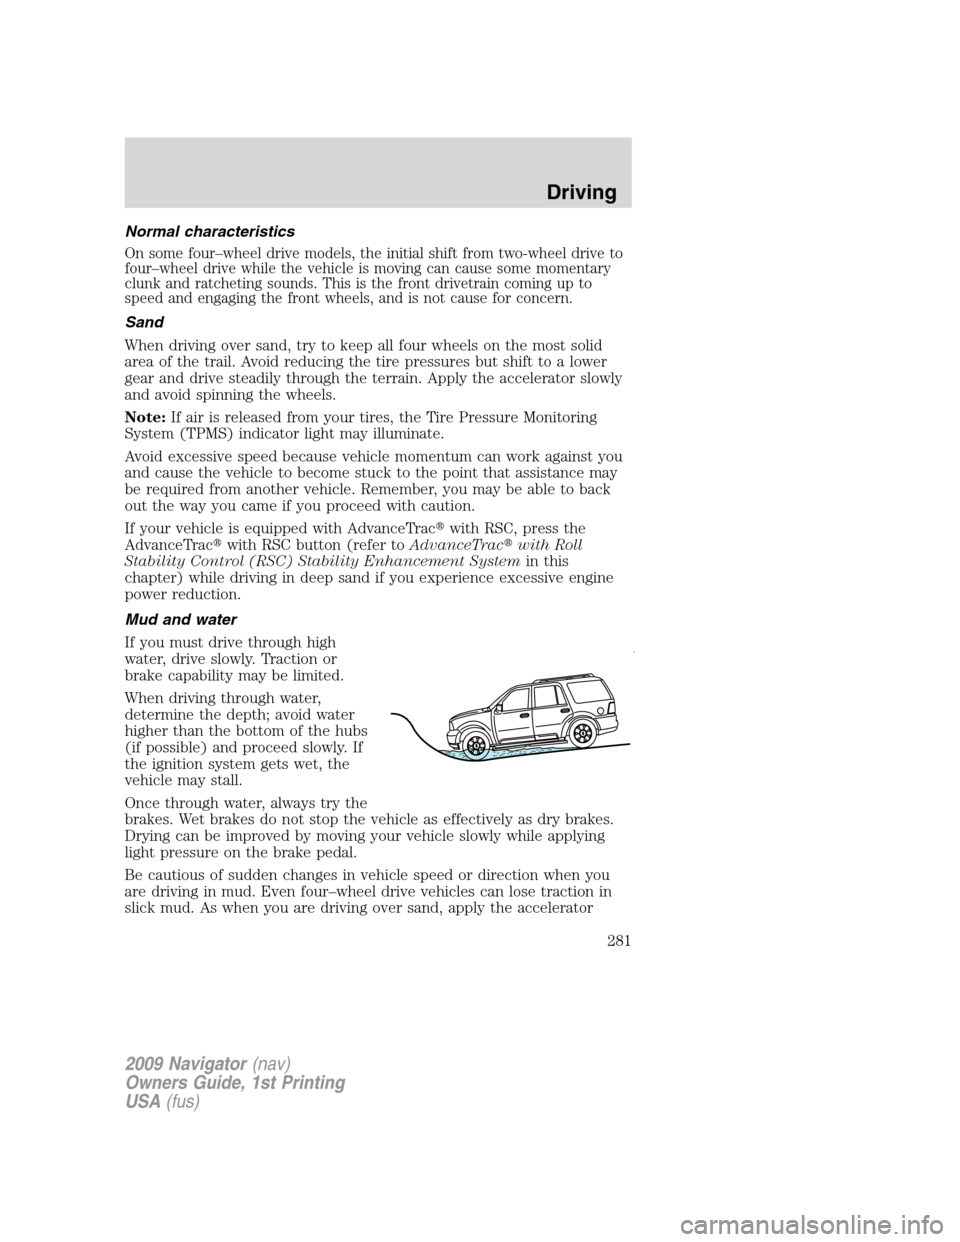 LINCOLN NAVIGATOR 2009 Manual PDF Normal characteristics
On some four–wheel drive models, the initial shift from two-wheel drive to
four–wheel drive while the vehicle is moving can cause some momentary
clunk and ratcheting sounds.